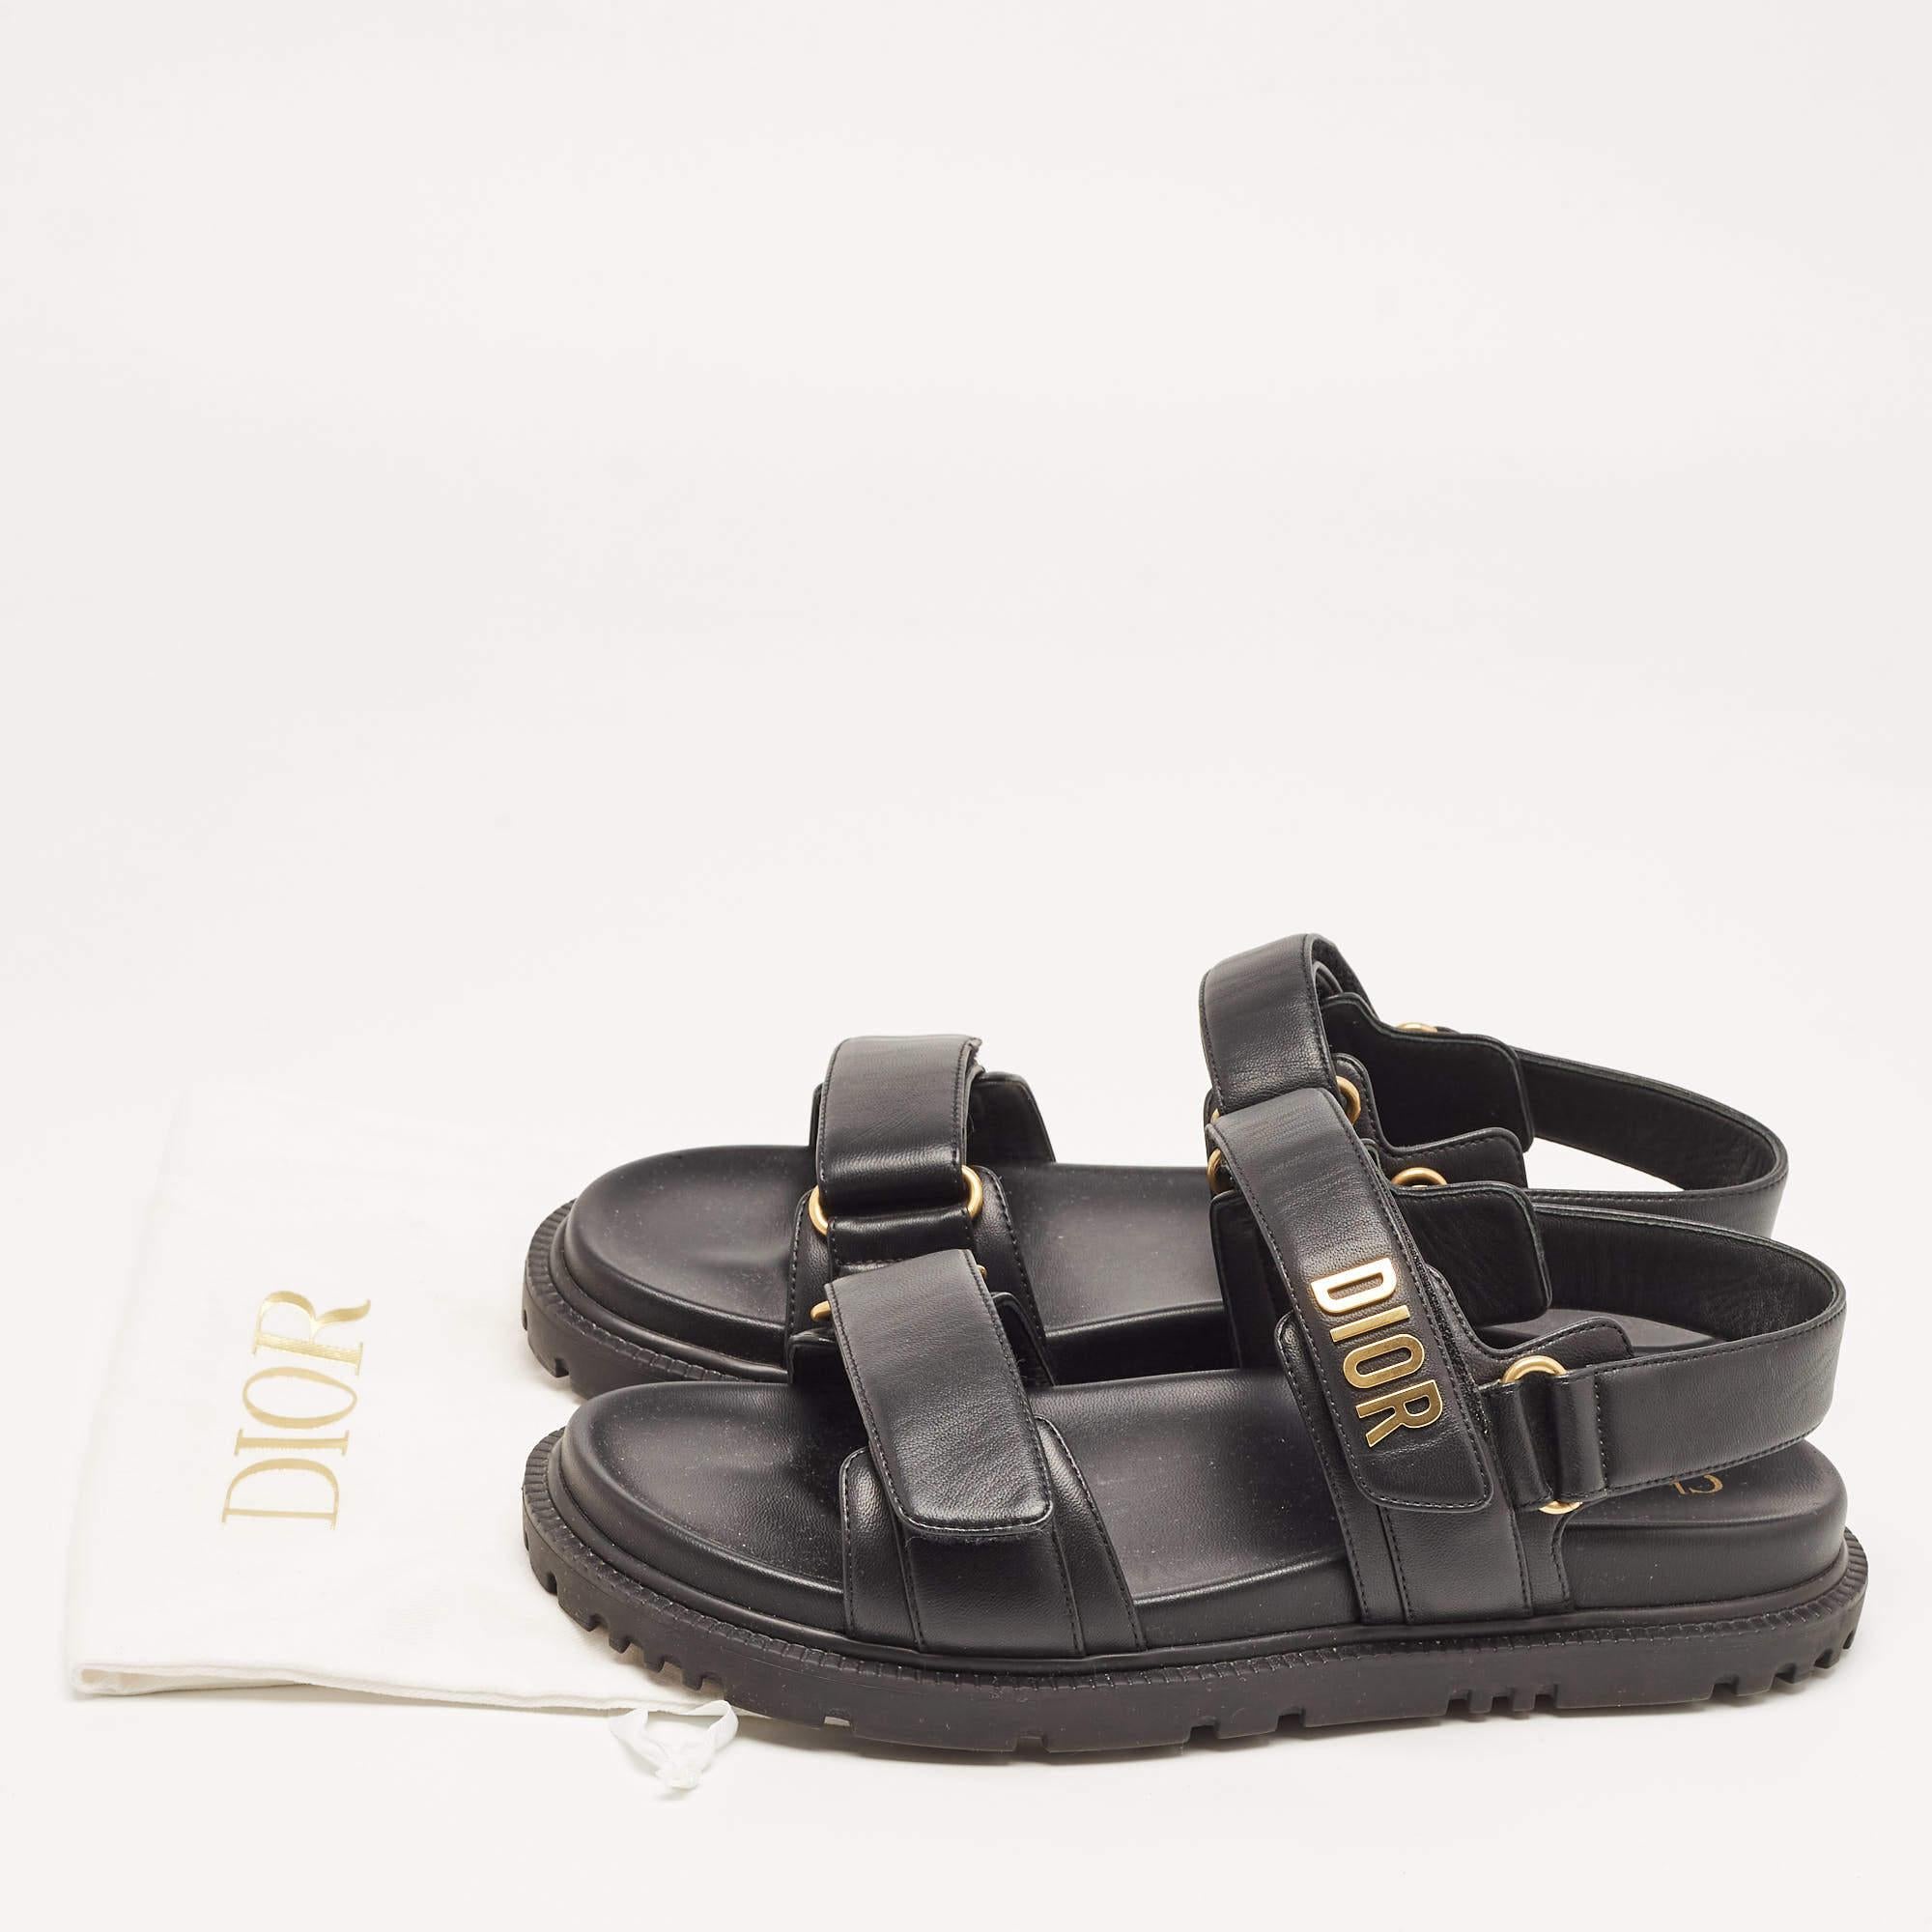 Dior Black Leather DiorAct Slingback Sandals Size 39.5 5